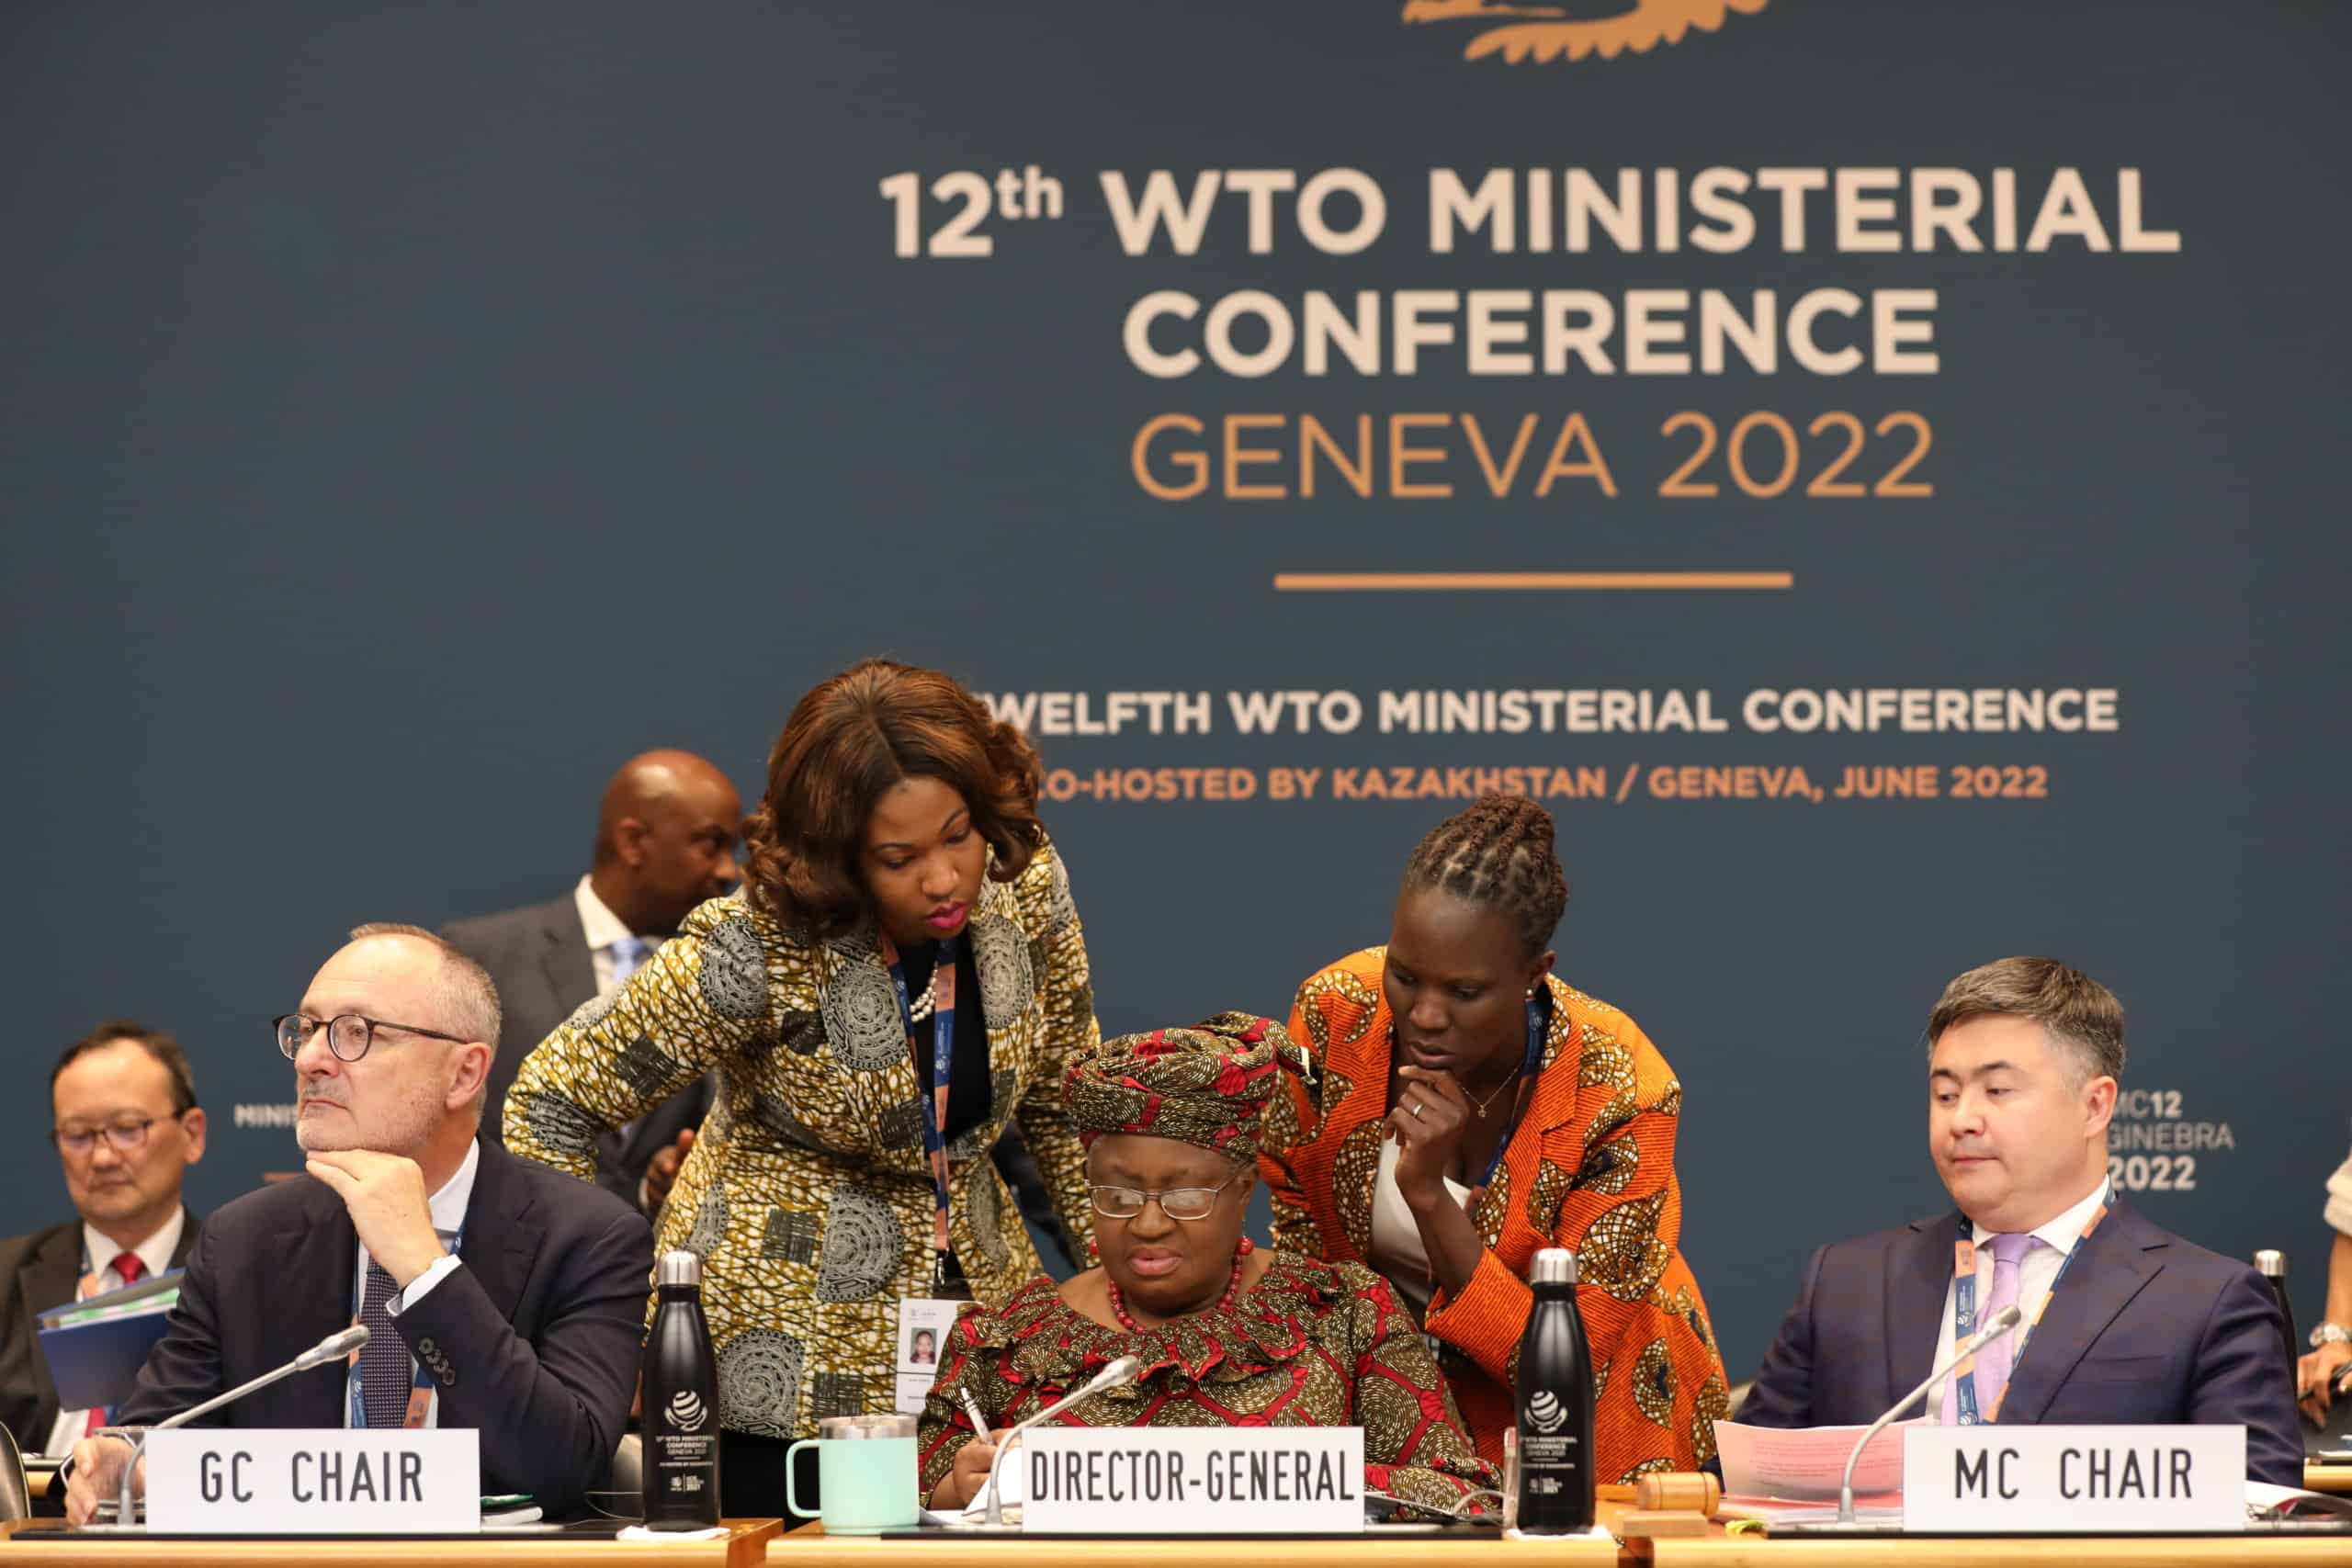 A photo from the 12th WTO Ministerial Conference, 2022.